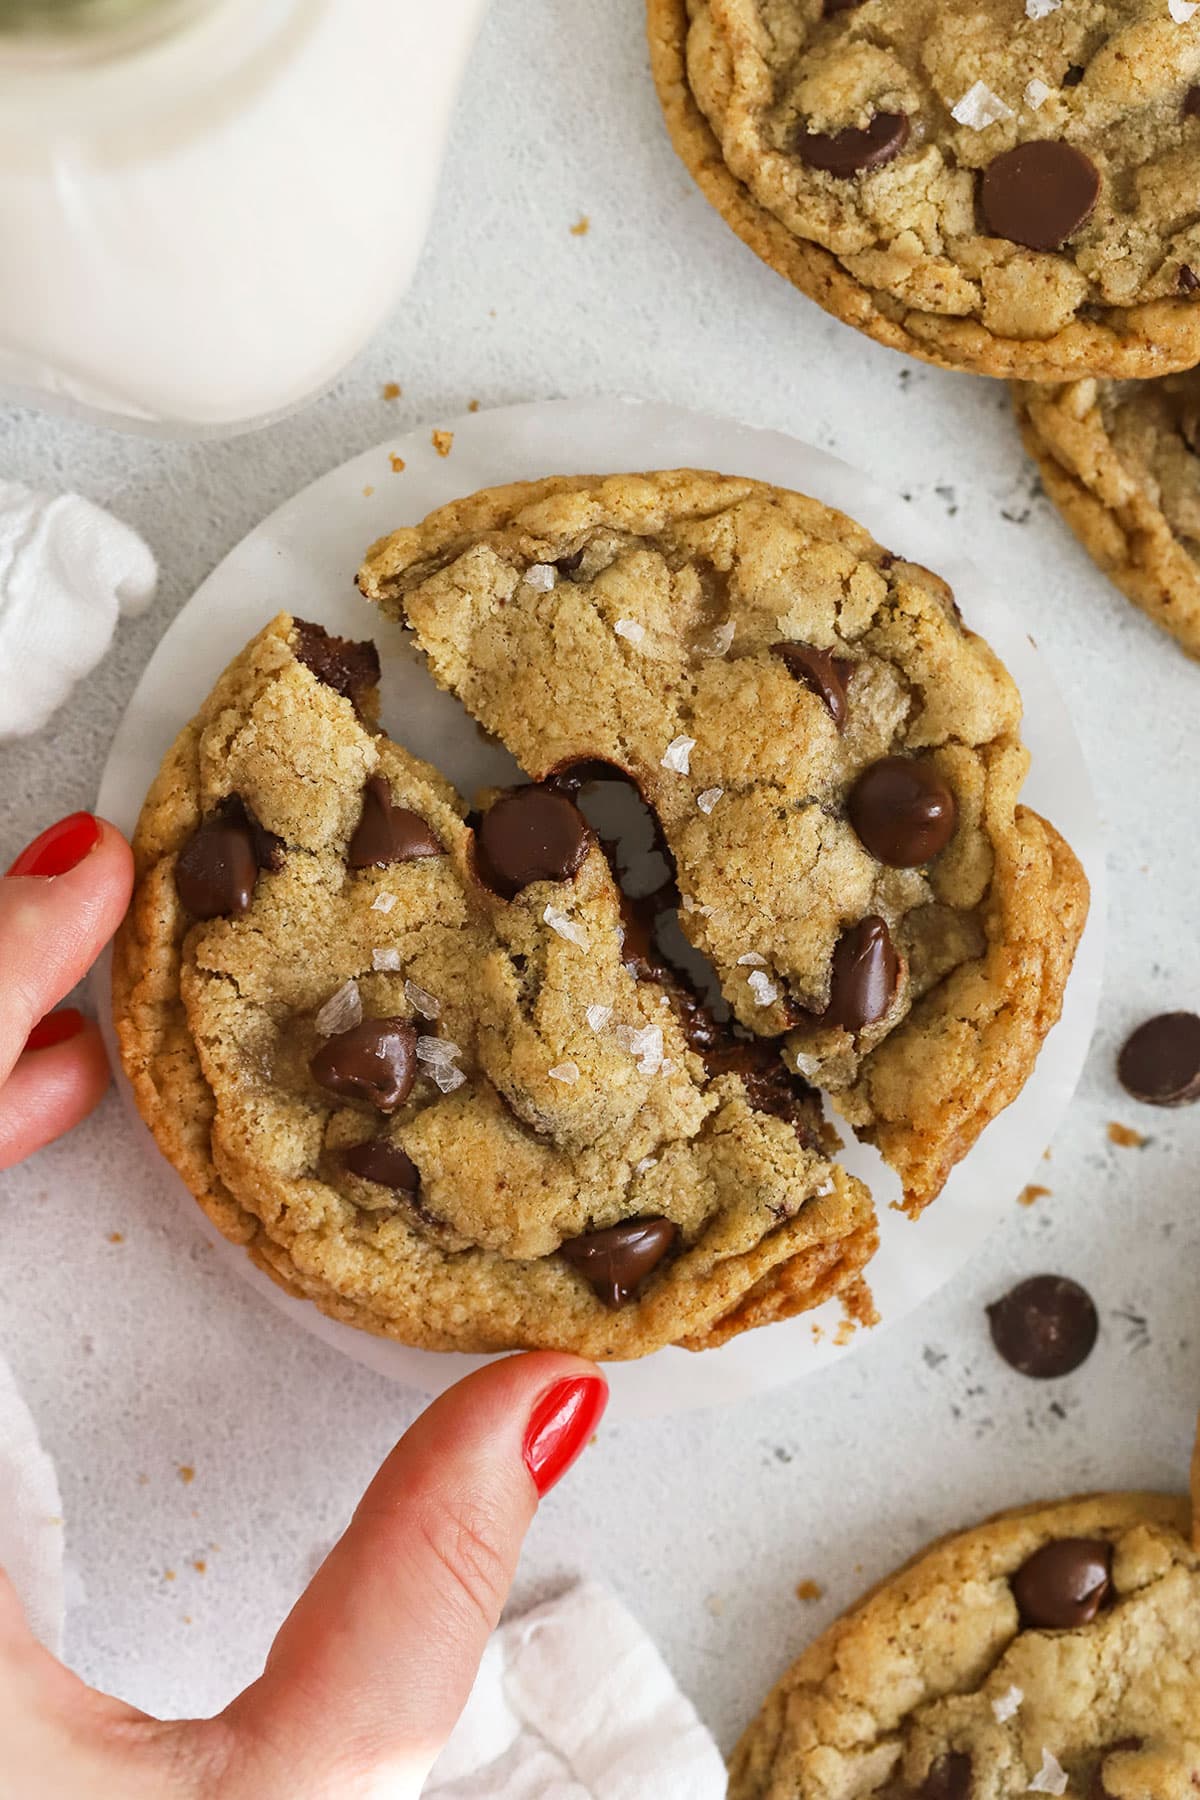 breaking a gluten-free brown butter chocolate chip cookie in half to show the gooey center